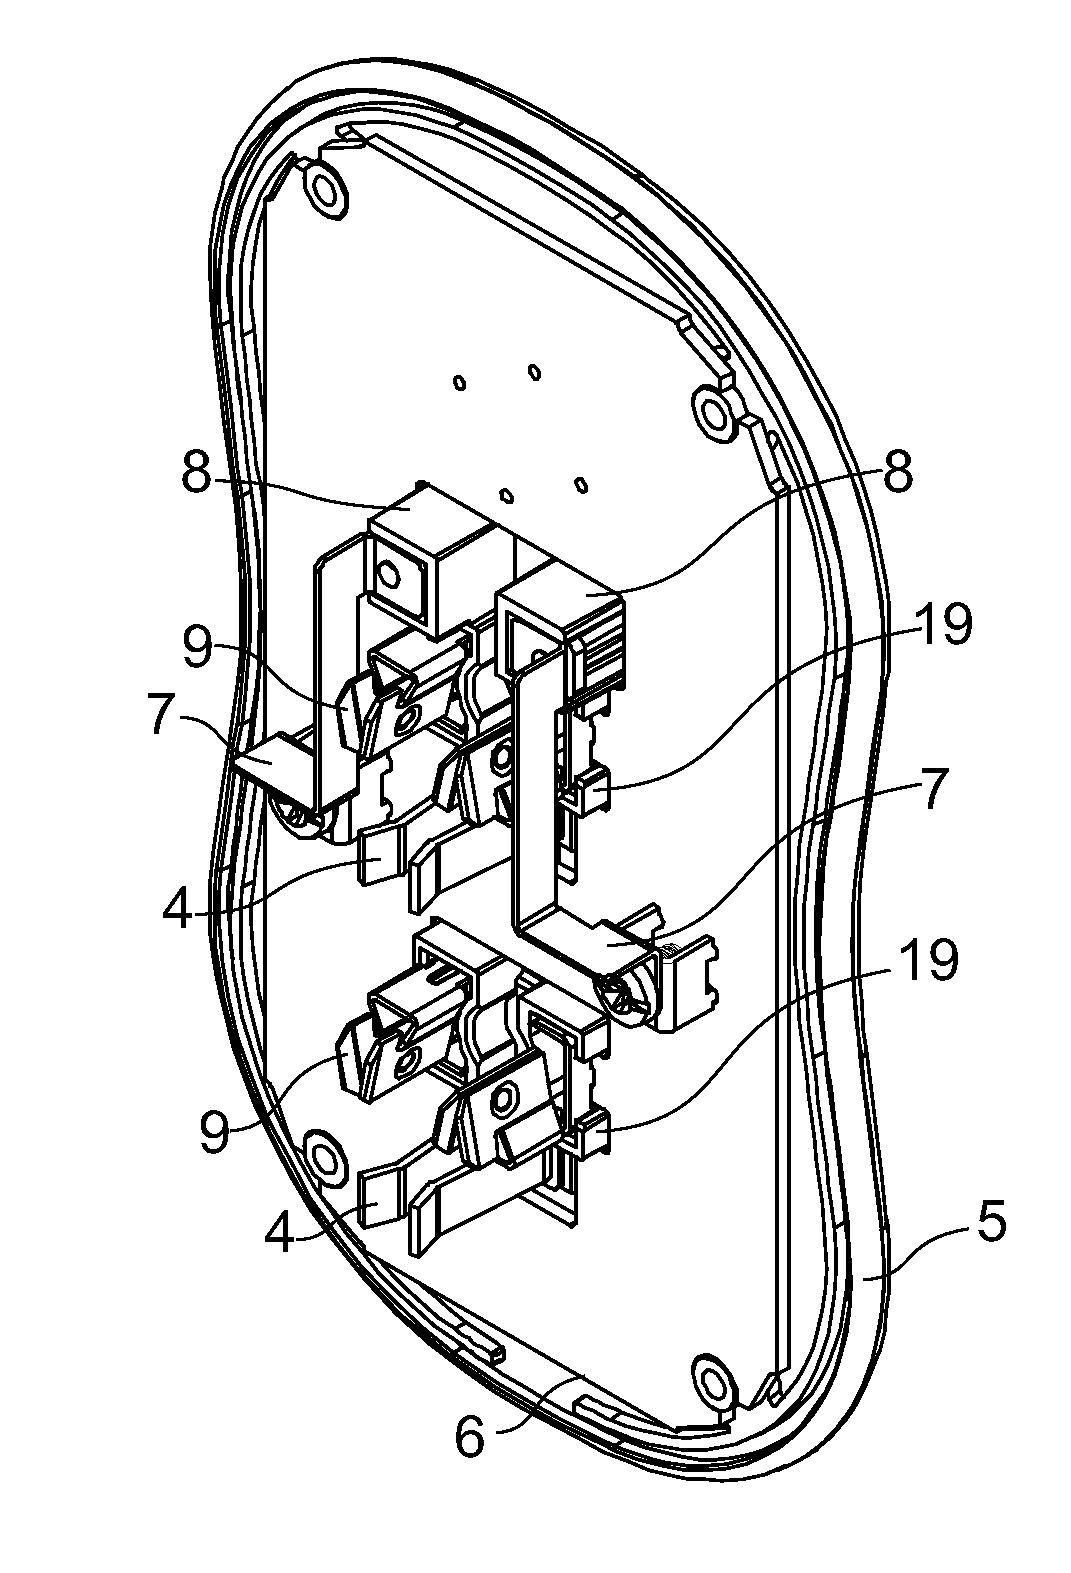 Blade and Housing Assembly